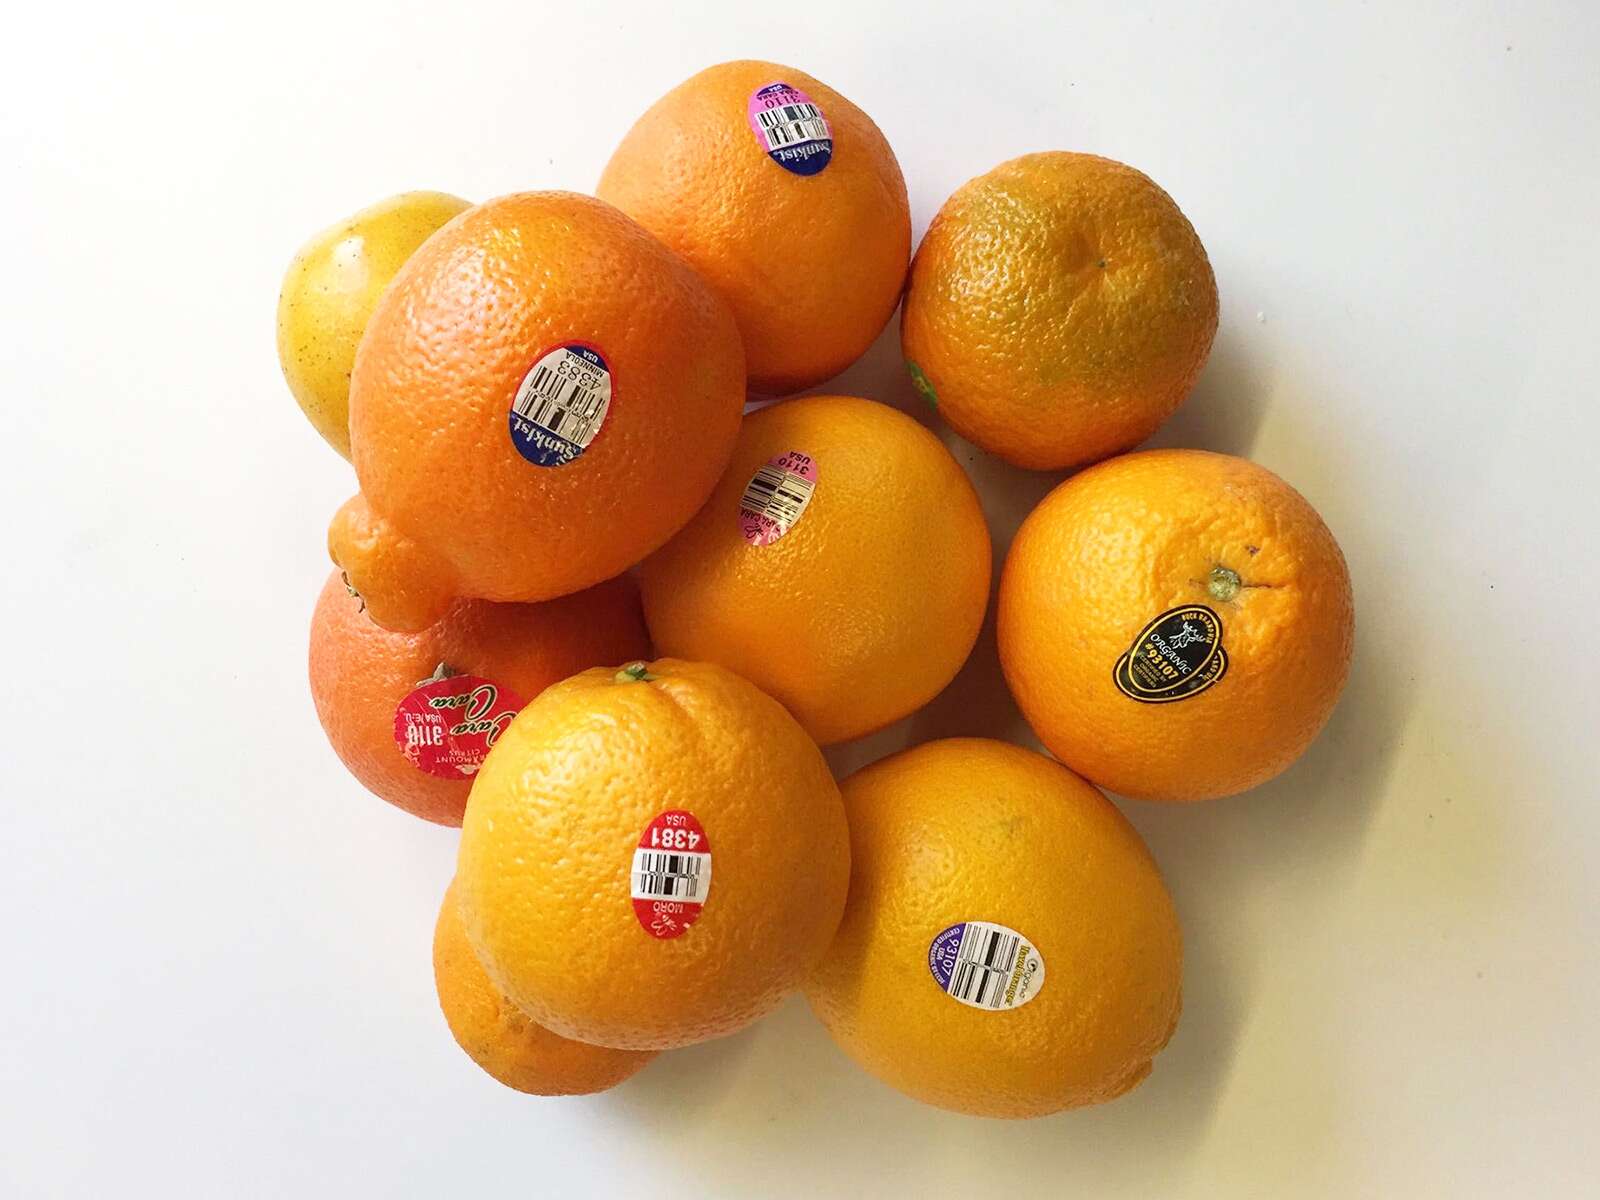 Mandarin Fruit Products - Manufacturer and Supplier